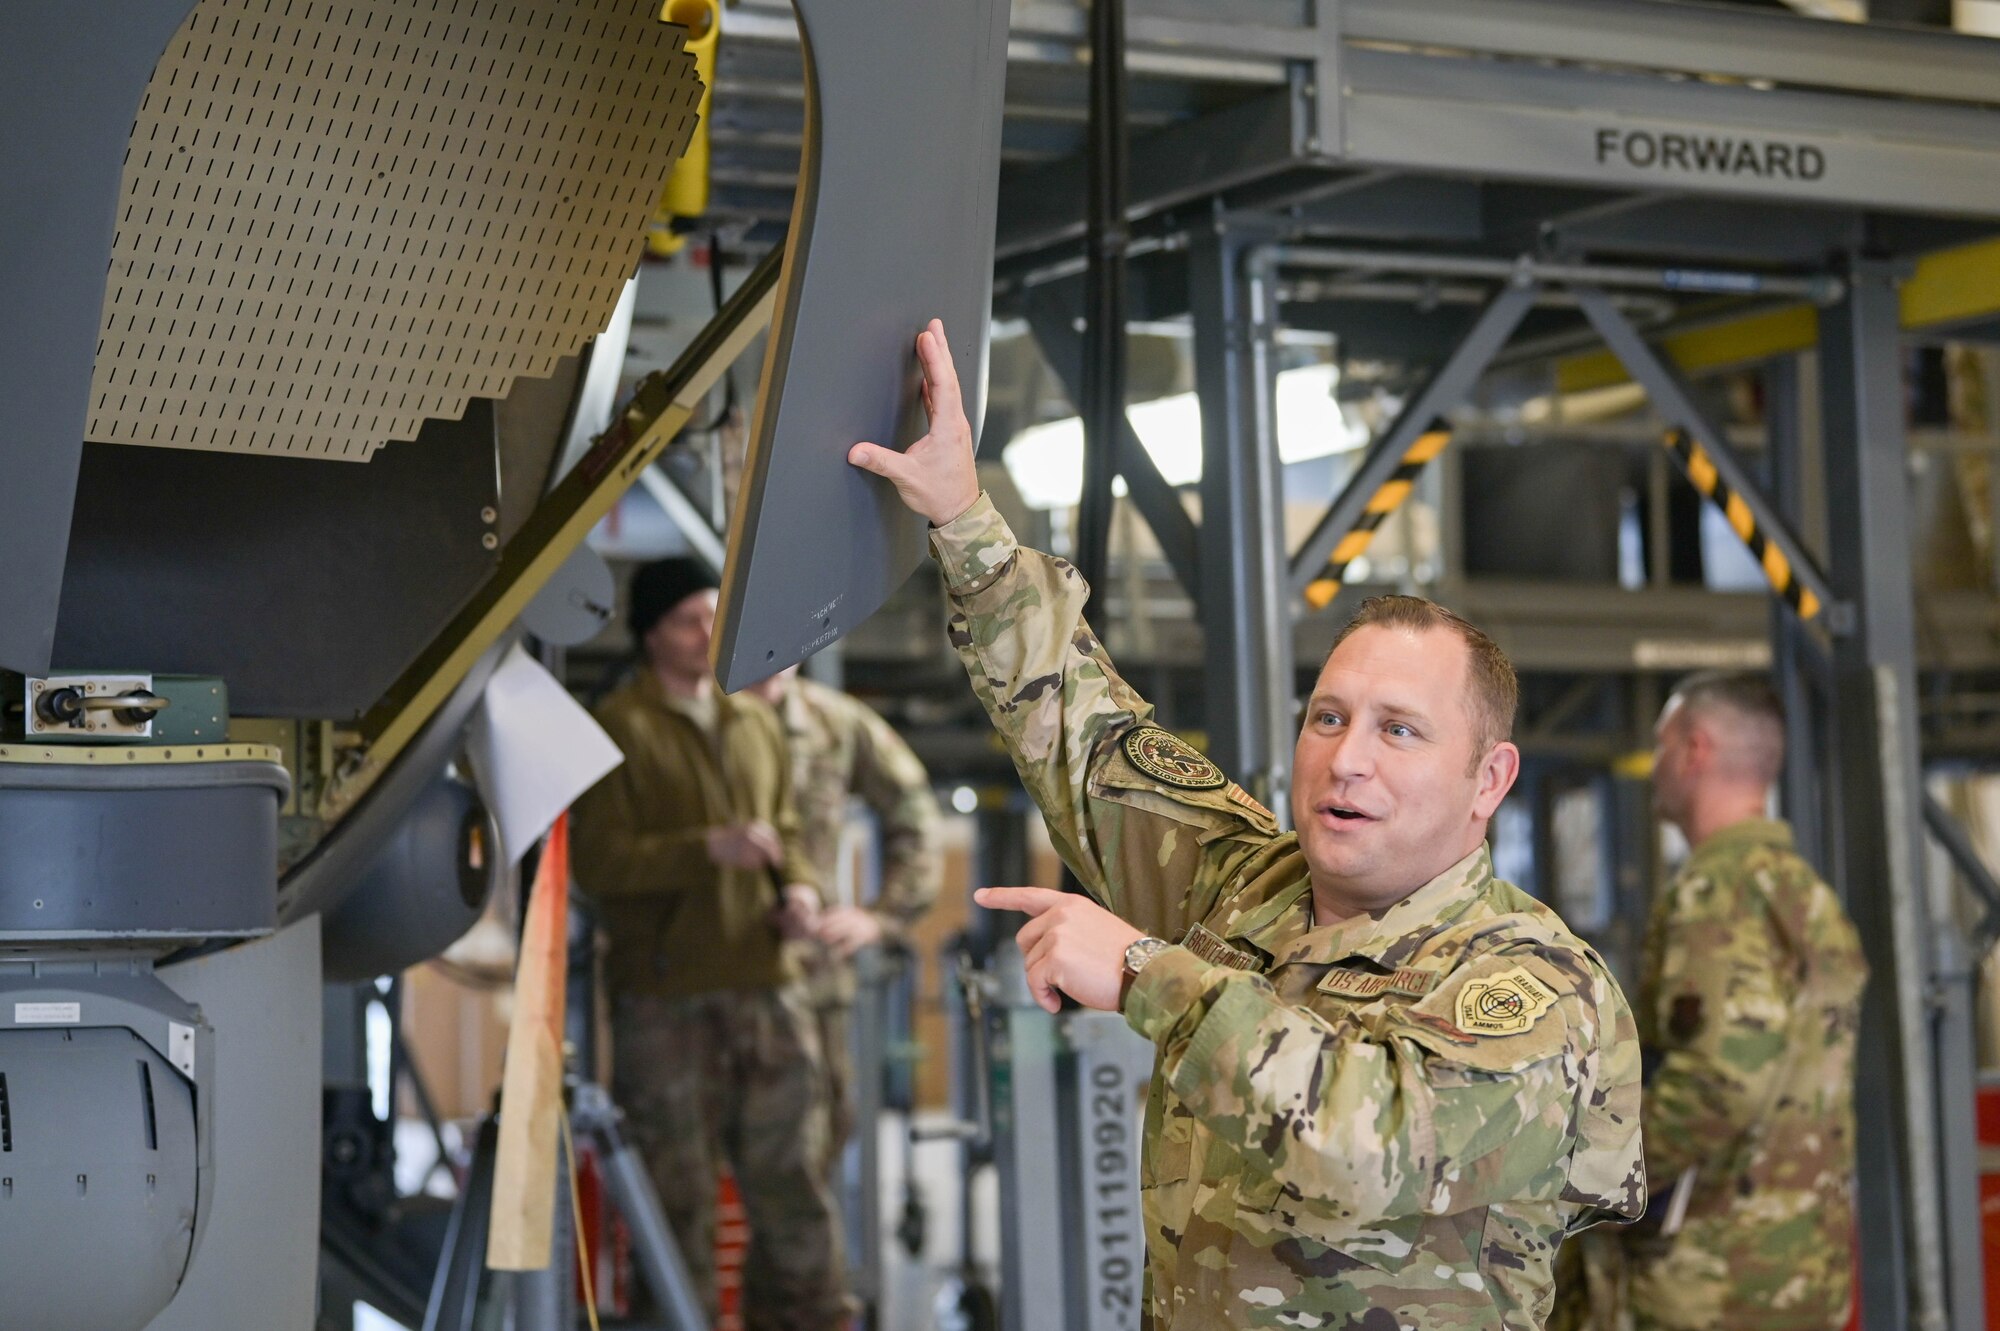 U.S. Air Force Chief Master Sgt. Lester Braithwaite, the senior enlisted leader of Air Combat Command directorate of logistics, engineering and force protection, points to an HC-130J Combat King II aircraft radar, March 25, 2022, at Moody Air Force Base, Georgia. Braithwaite worked in avionics for 16 years prior to becoming a command chief. (U.S. Air Force photo by Senior Airman Rebeckah Medeiros)